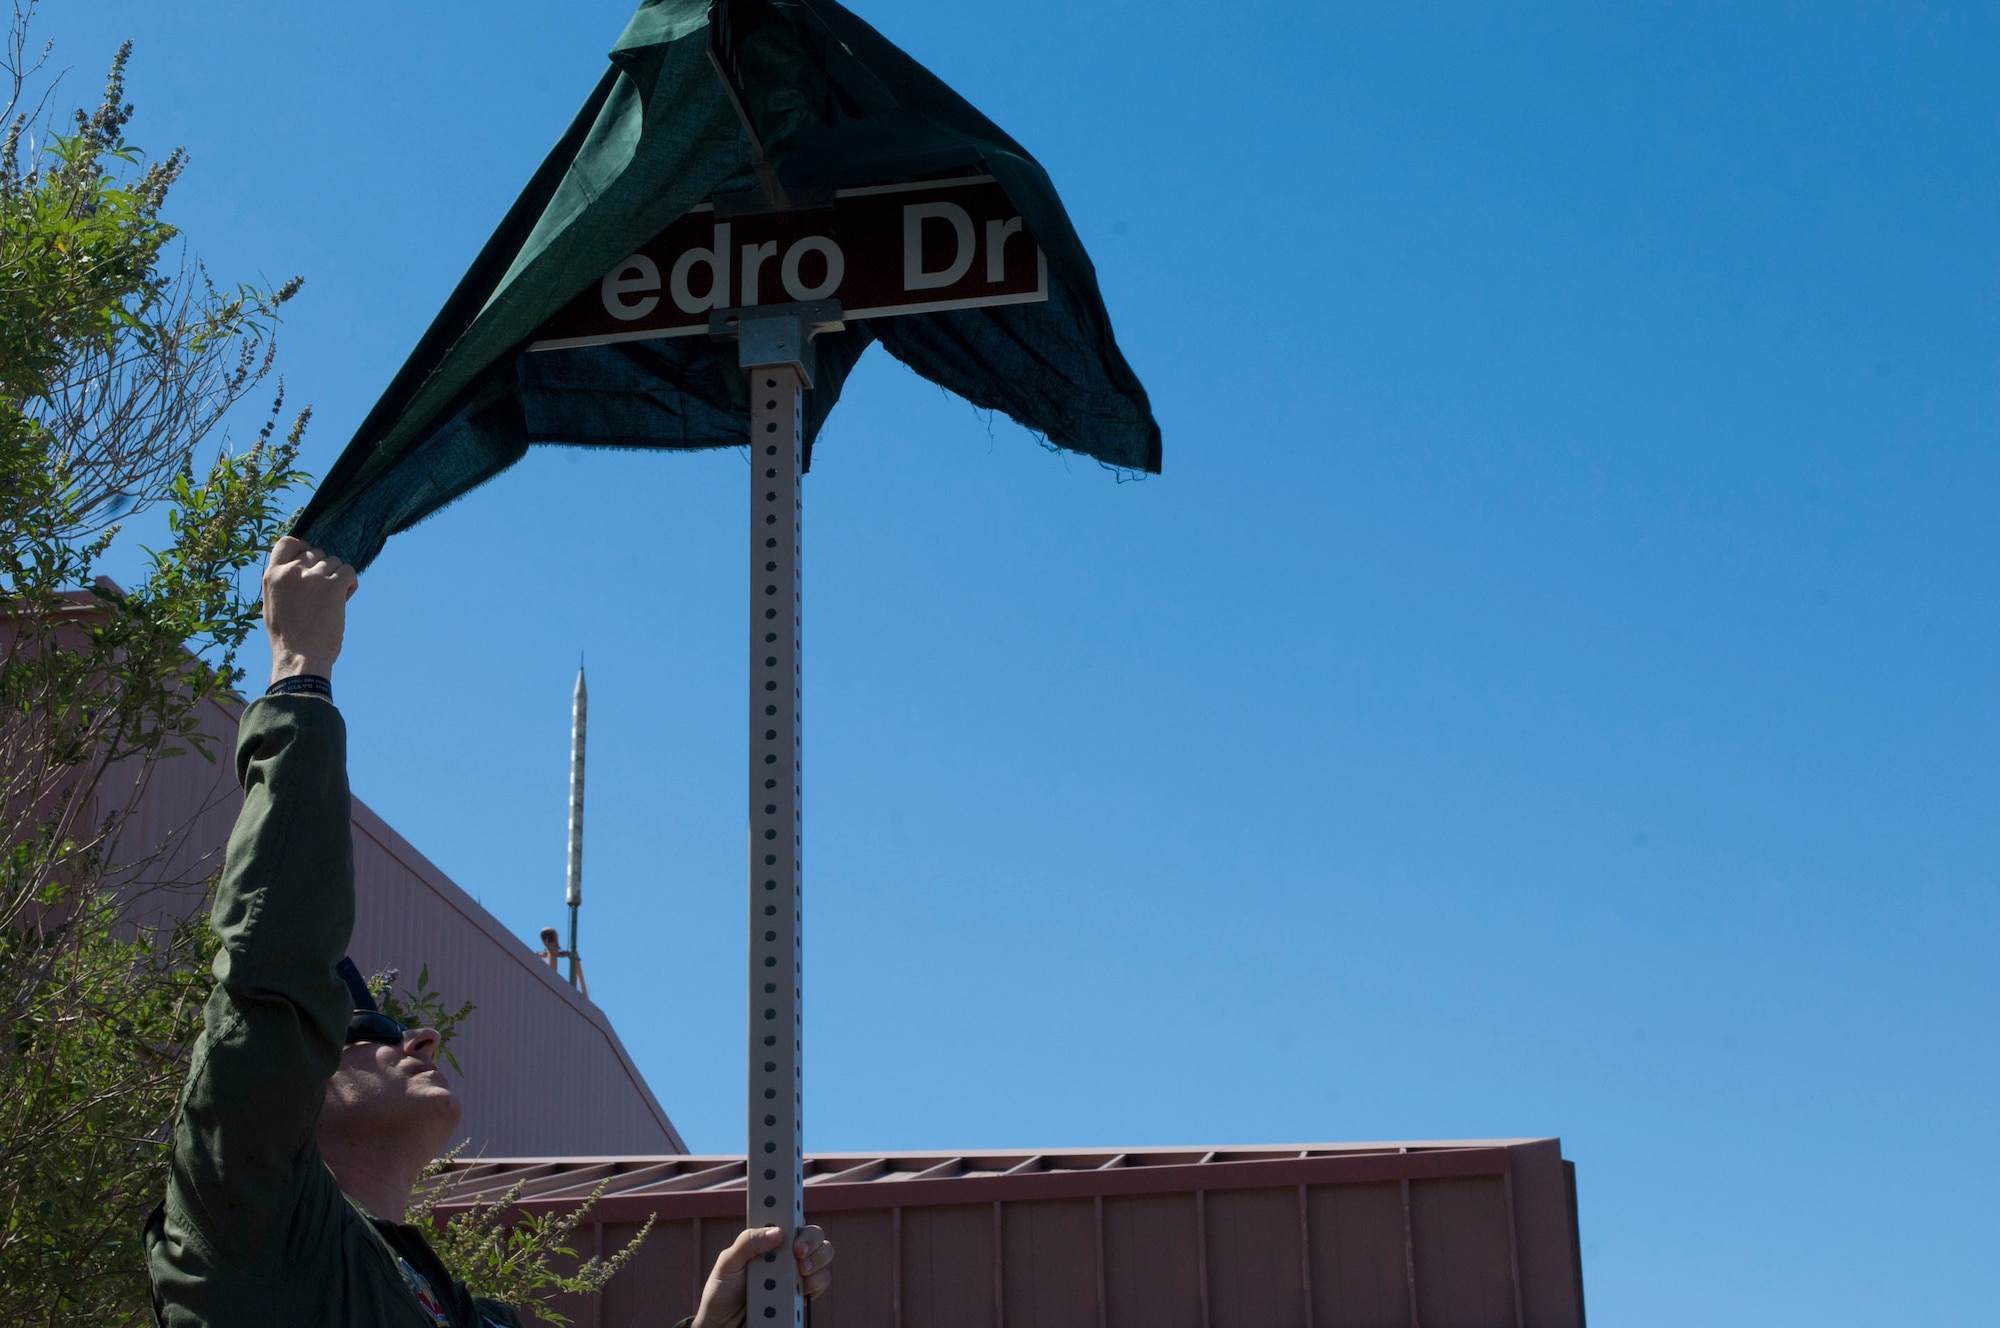 Staff Sgt. Christopher Cholet, 66th Rescue Squadron flight engineer instructor, pulls the cover off a new street sign during a street naming ceremony June 10, 2013, at Nellis Air Force Base, Nev. Pedro Drive is named in honor of the crew of the HH60G Pave Hawk helicopter, call sign "PEDRO 66" that was shot down and crashed three years ago in Helmand Province, Afghanistan. (U.S. Air Force photo by Airman 1st Class Joshua Kleinholz)